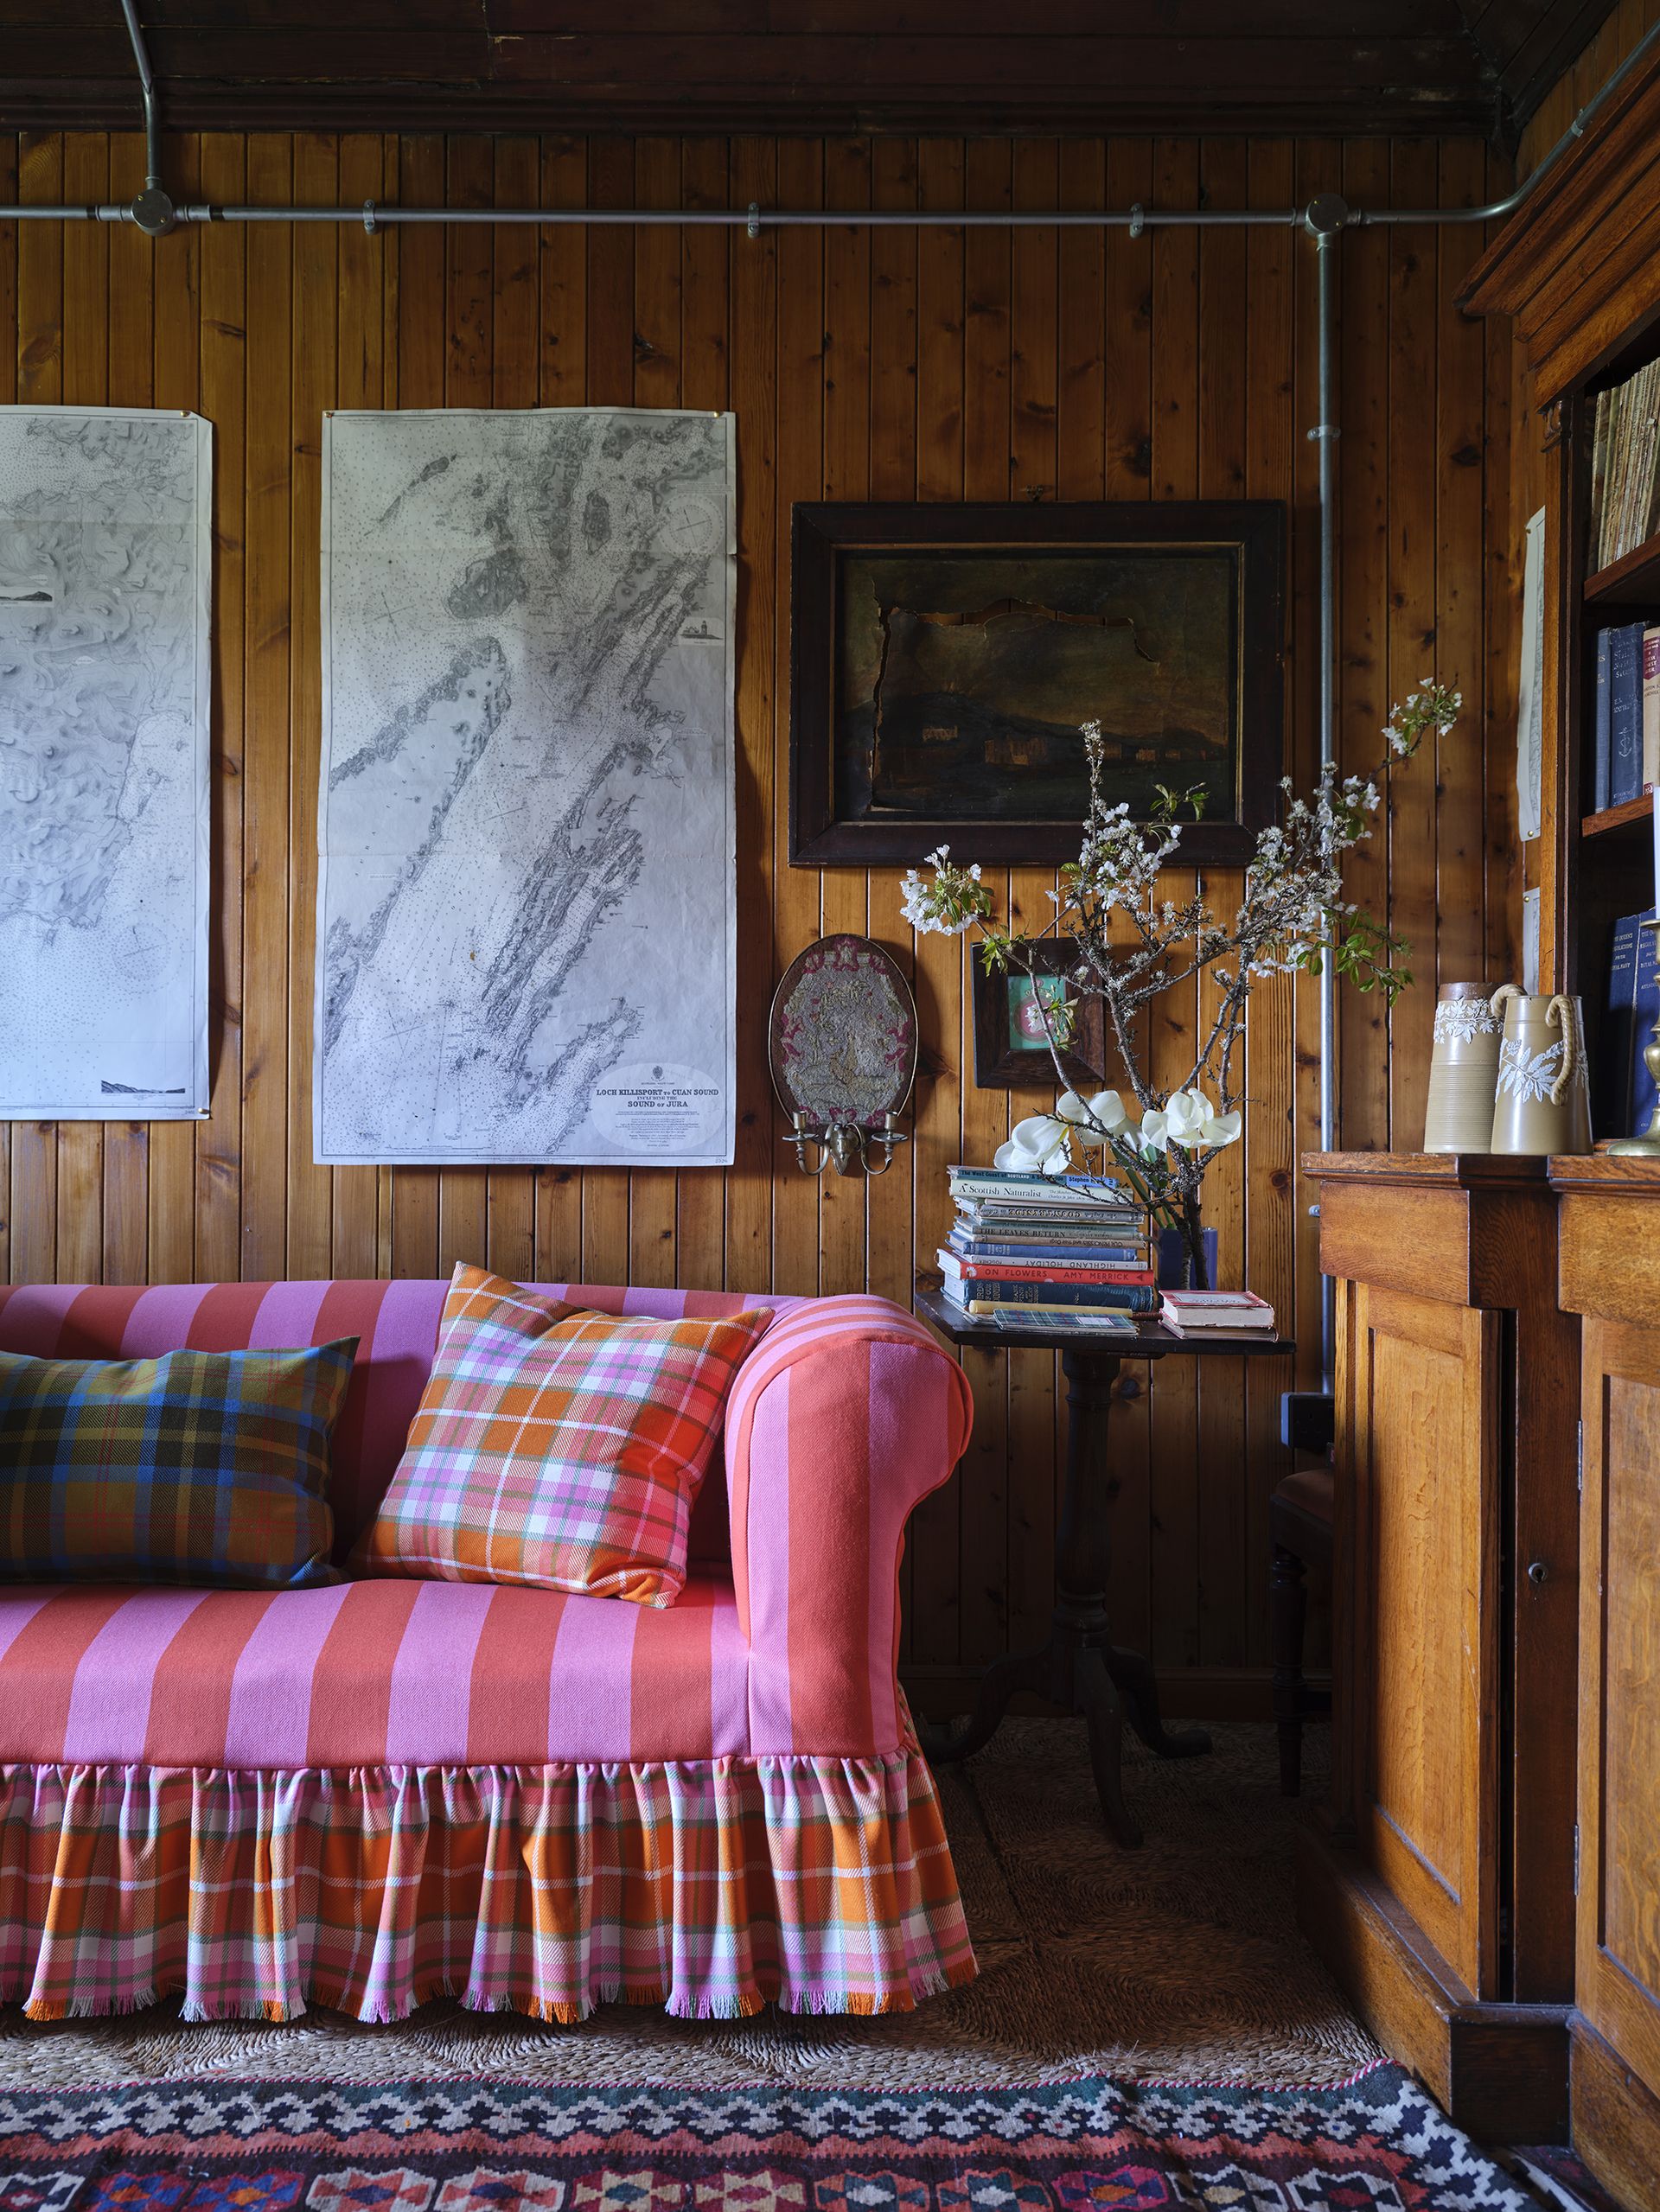 Decorating with checks – 11 ways to embrace this classic pattern